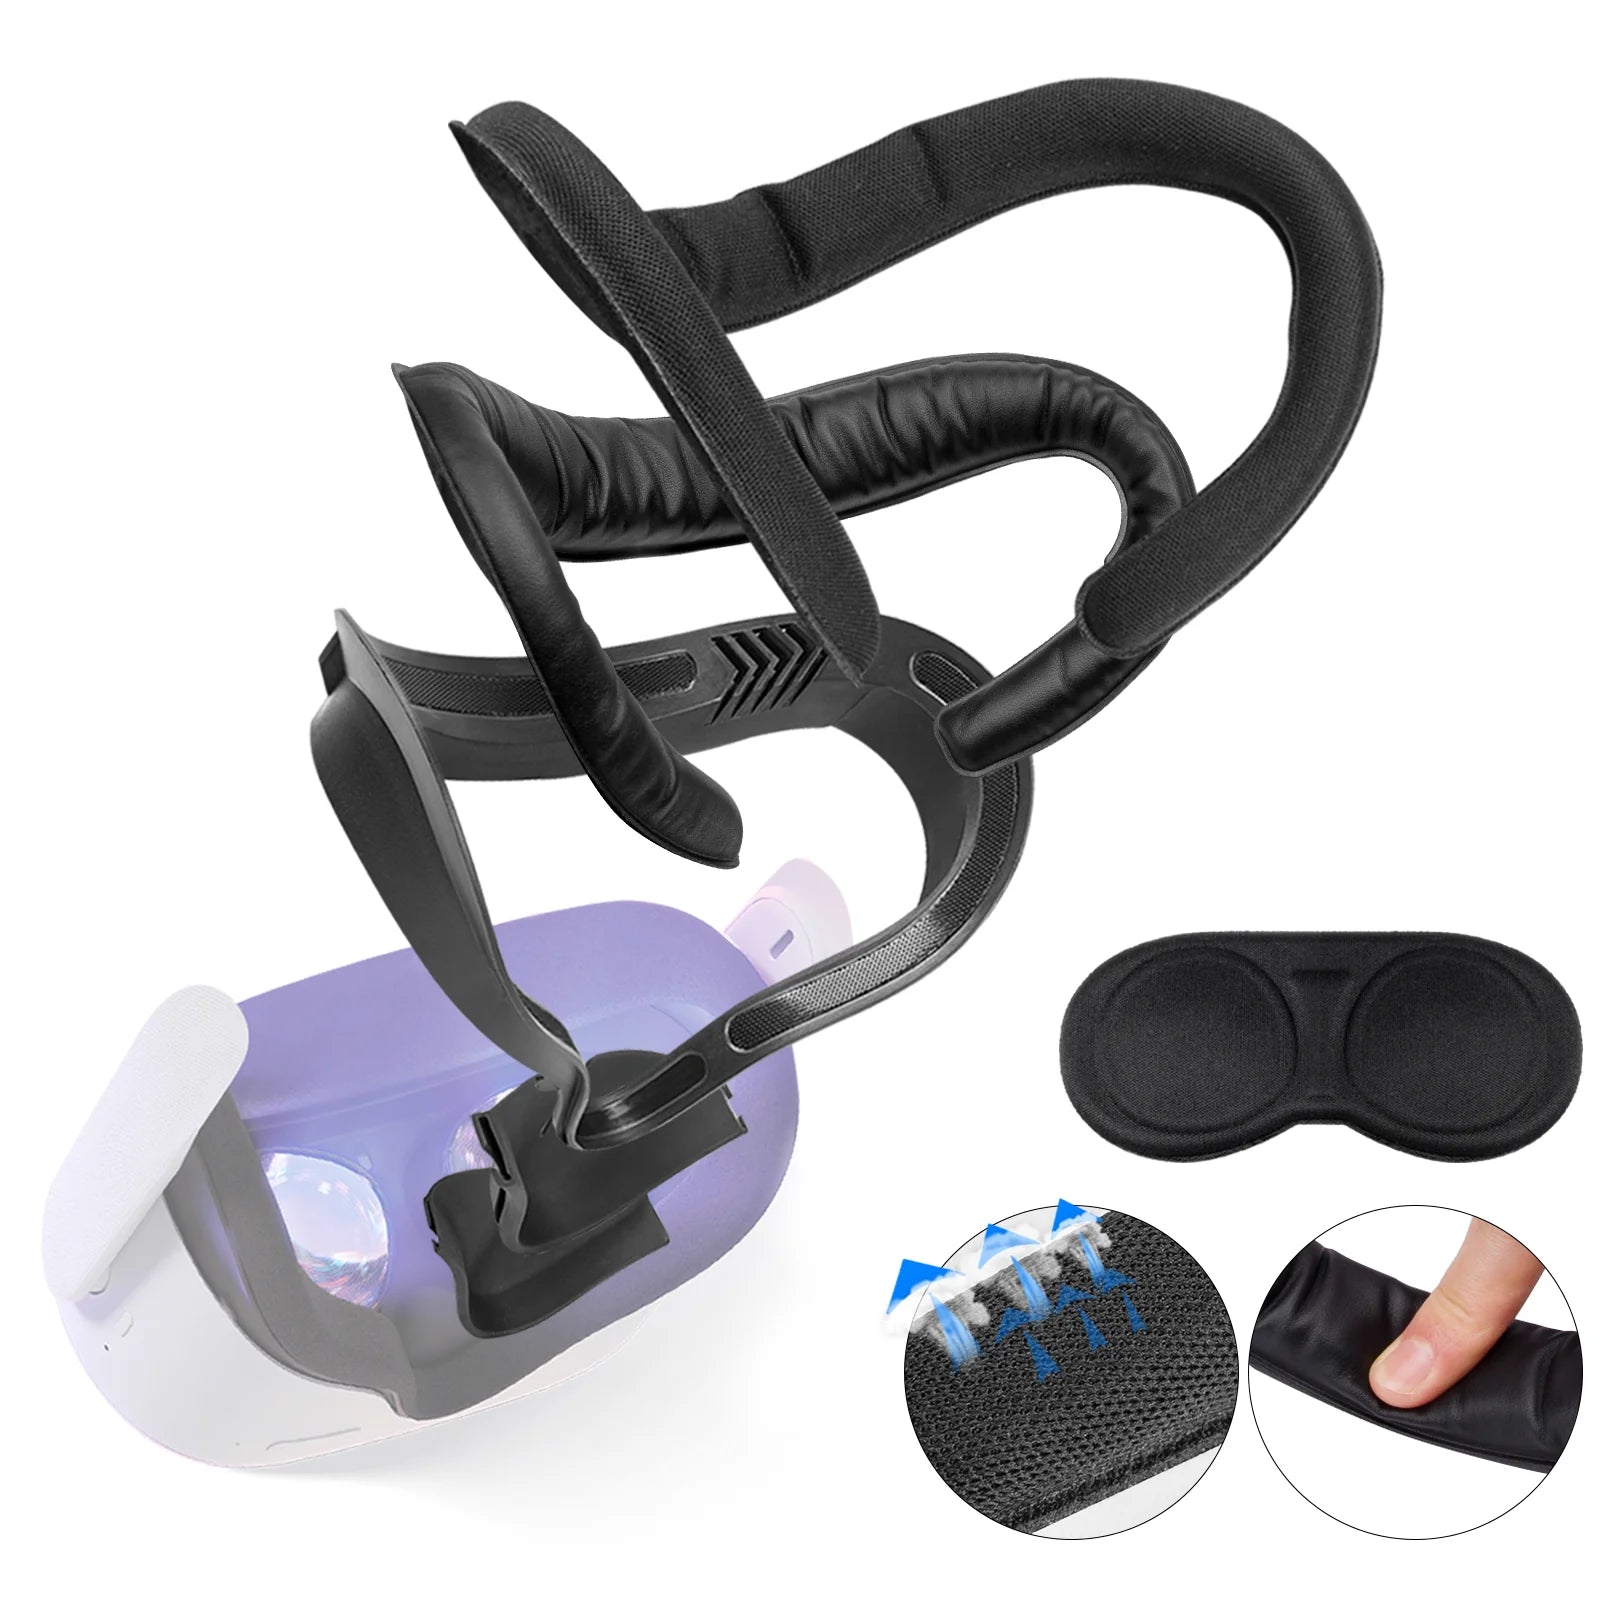 VR Face Cover Facial Interface Accessories for Oculus Quest 2, Face Cushion Foam Pad Replacement 6 in 1